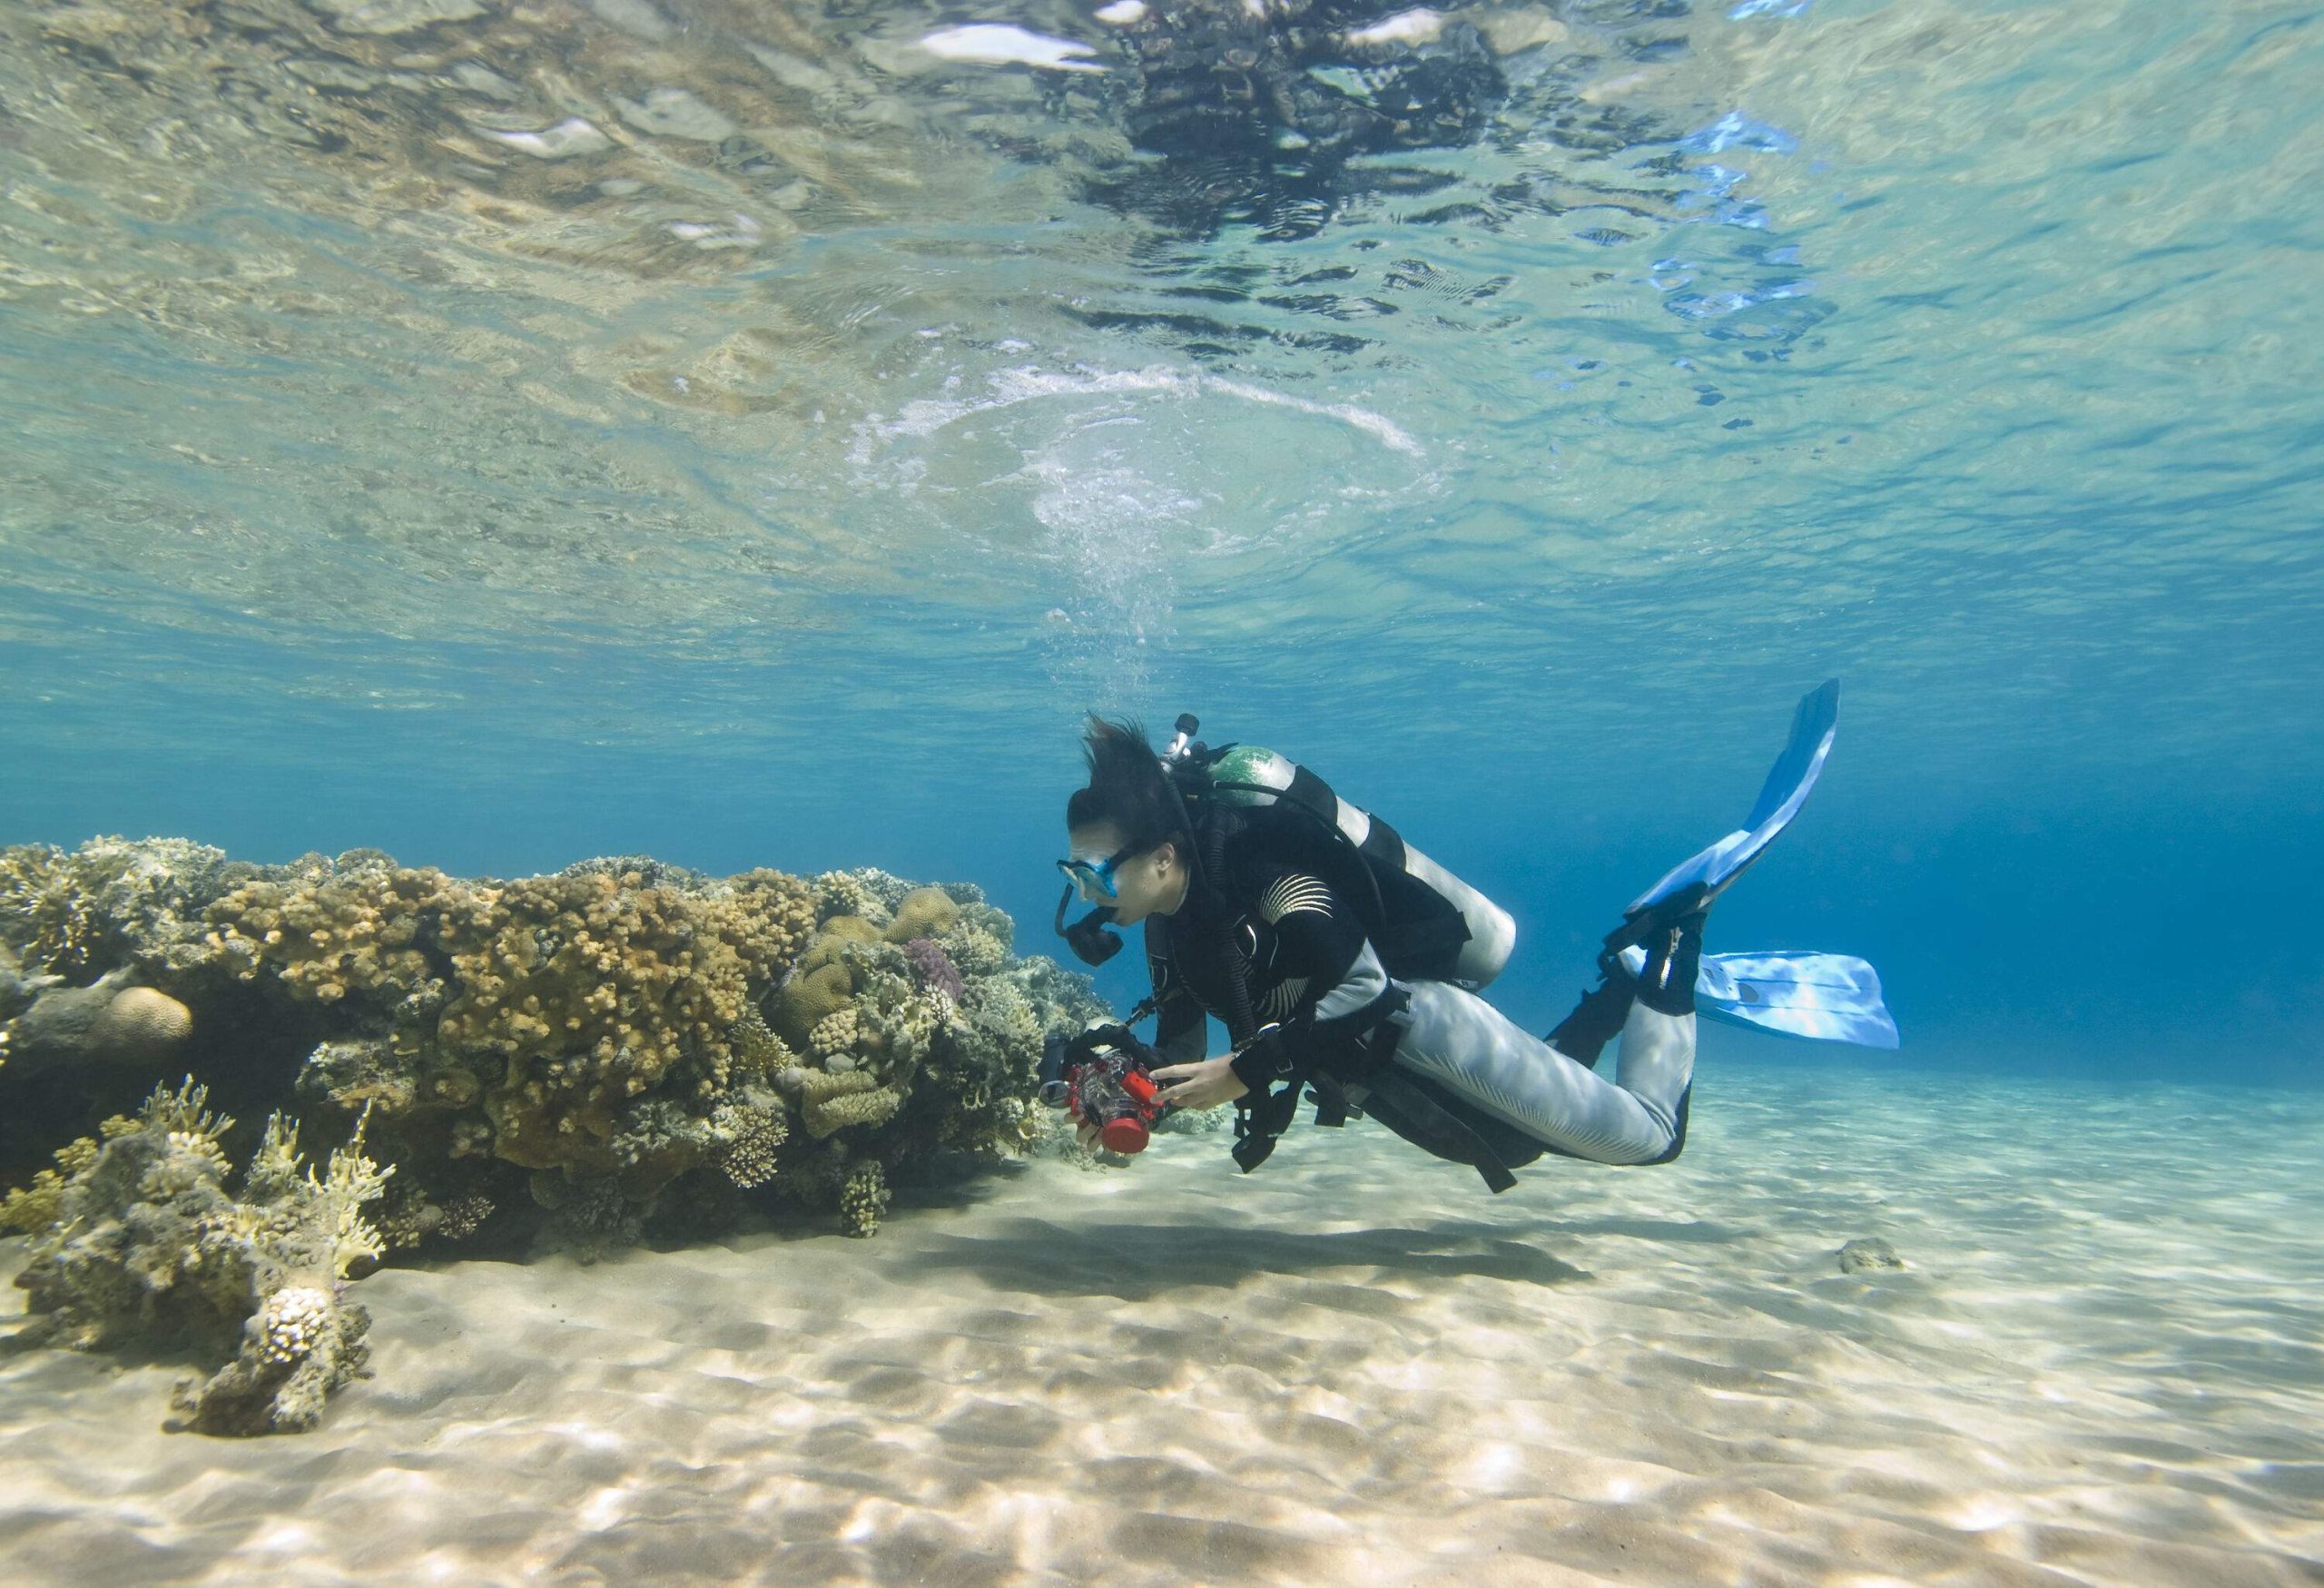 A lady tourist scuba diving along a coral reef on the blue crystalline sea.